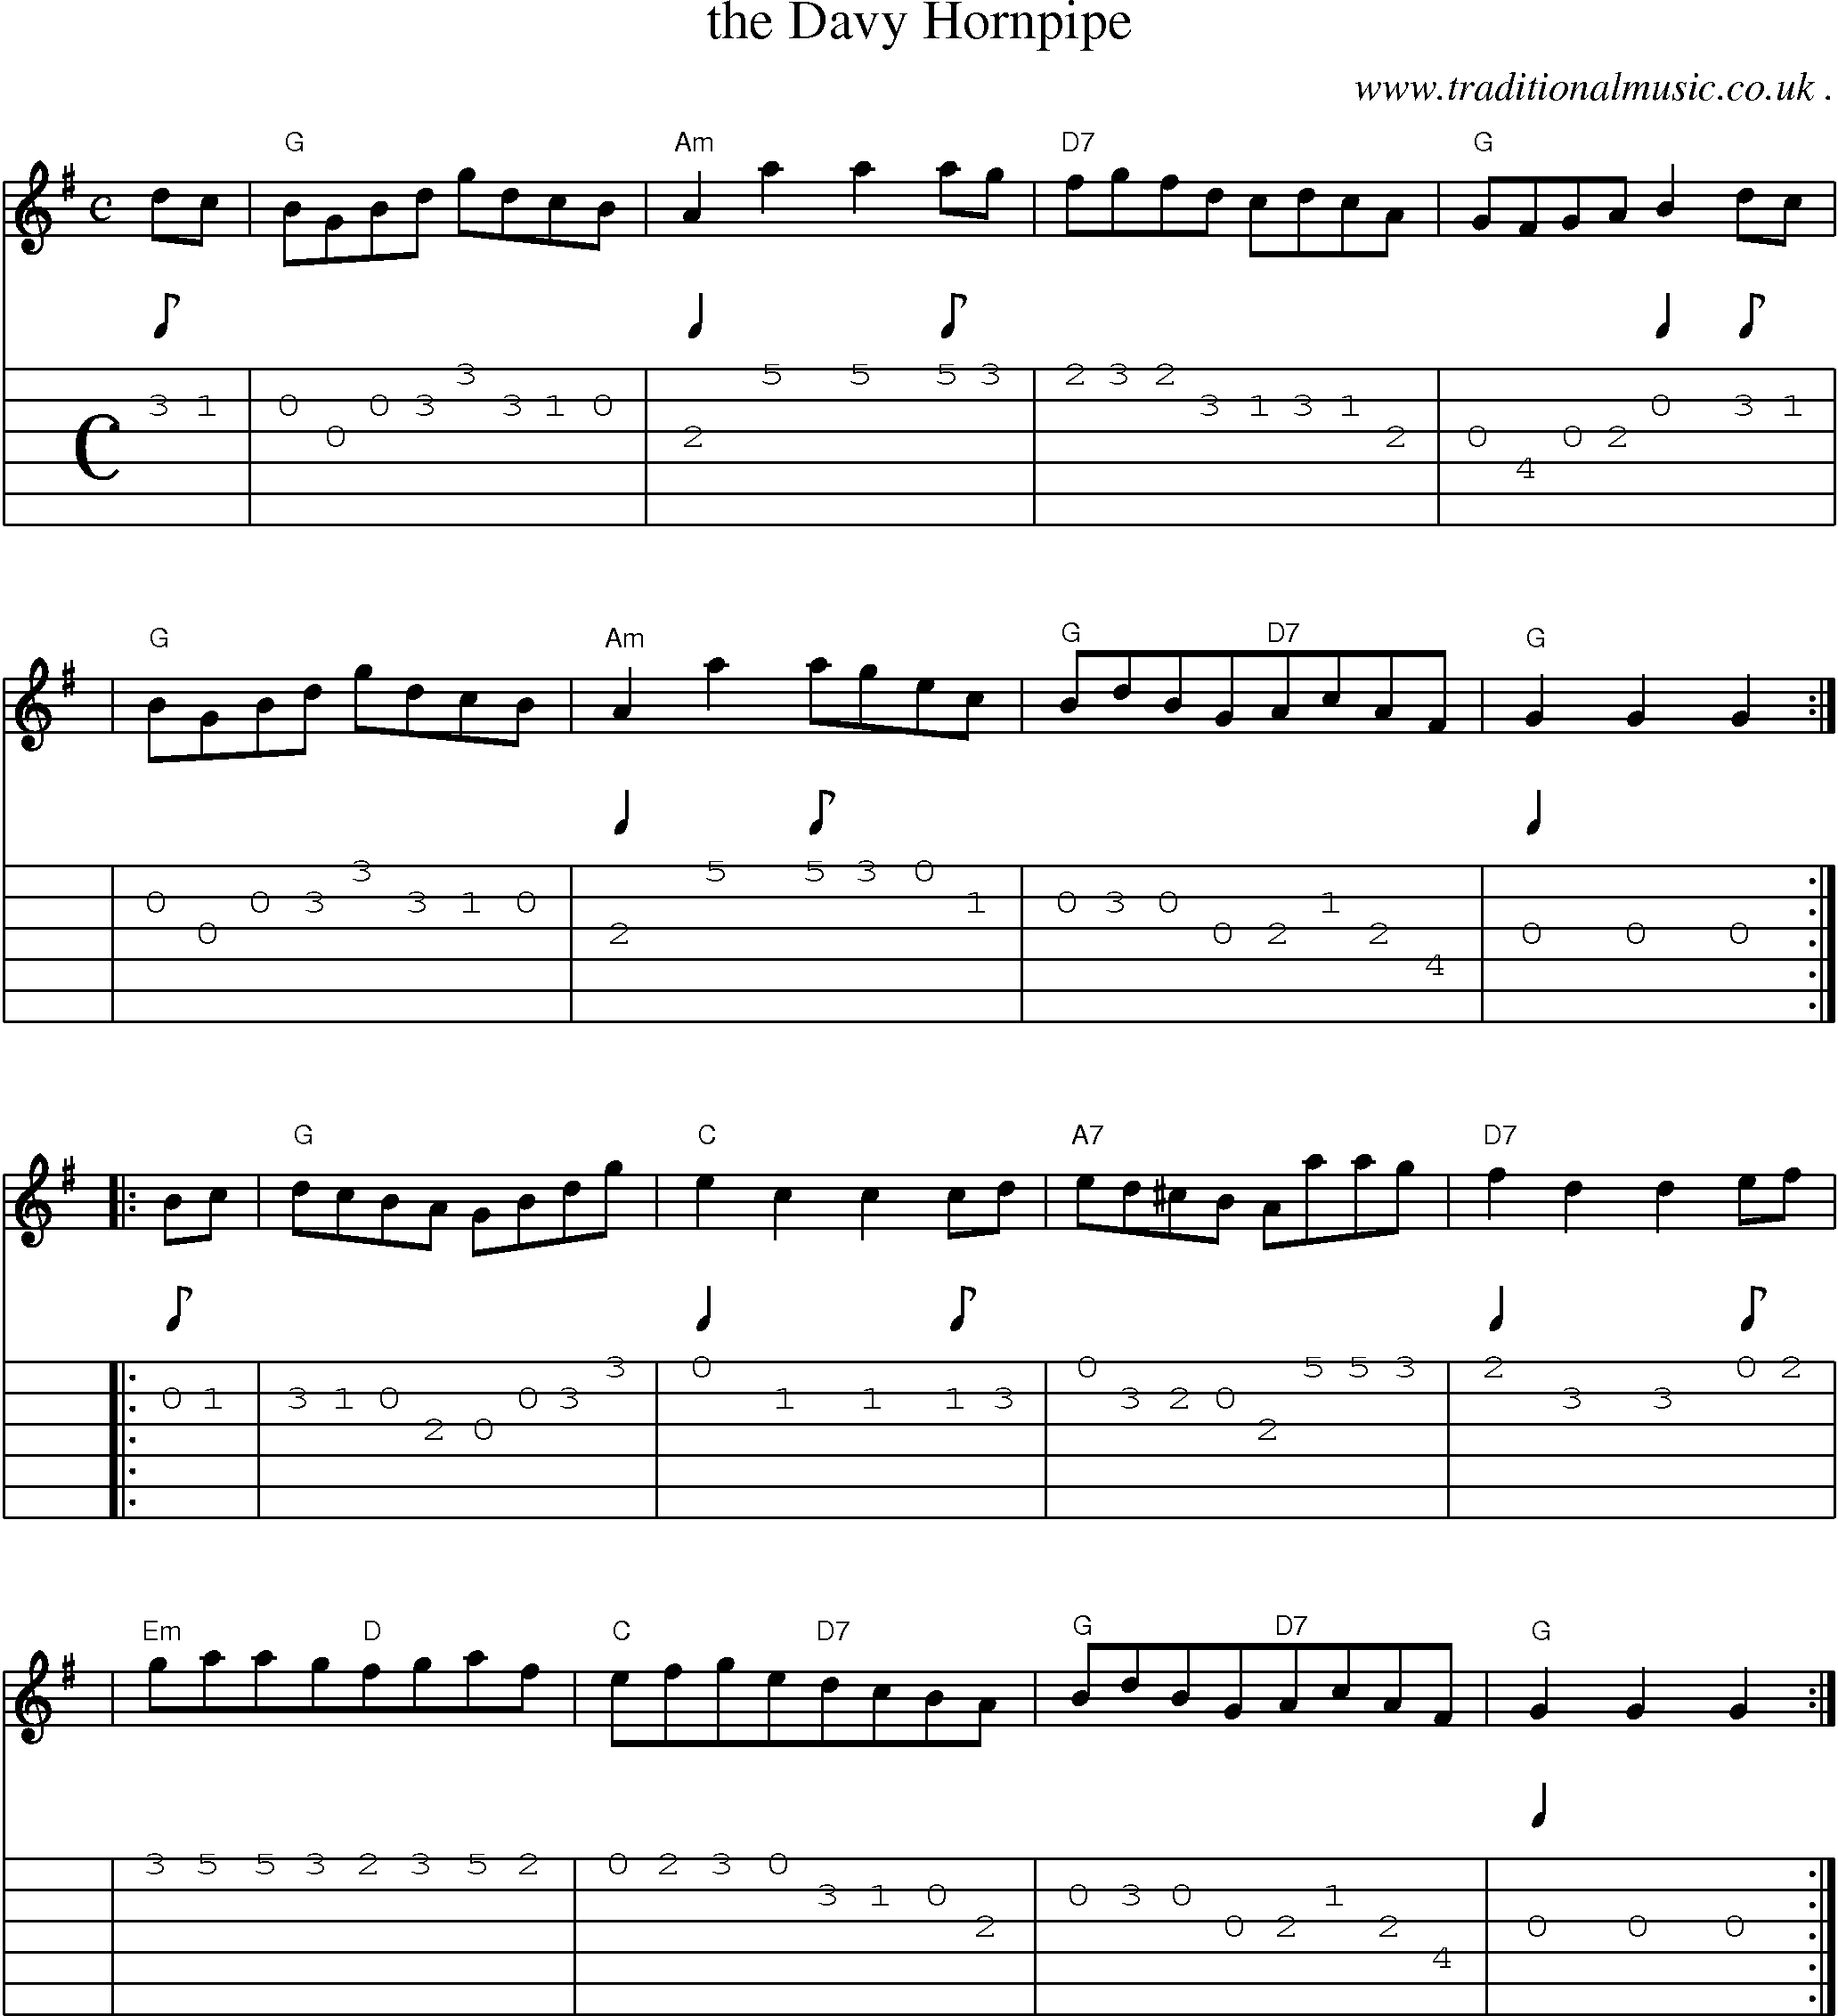 Sheet-Music and Guitar Tabs for The Davy Hornpipe